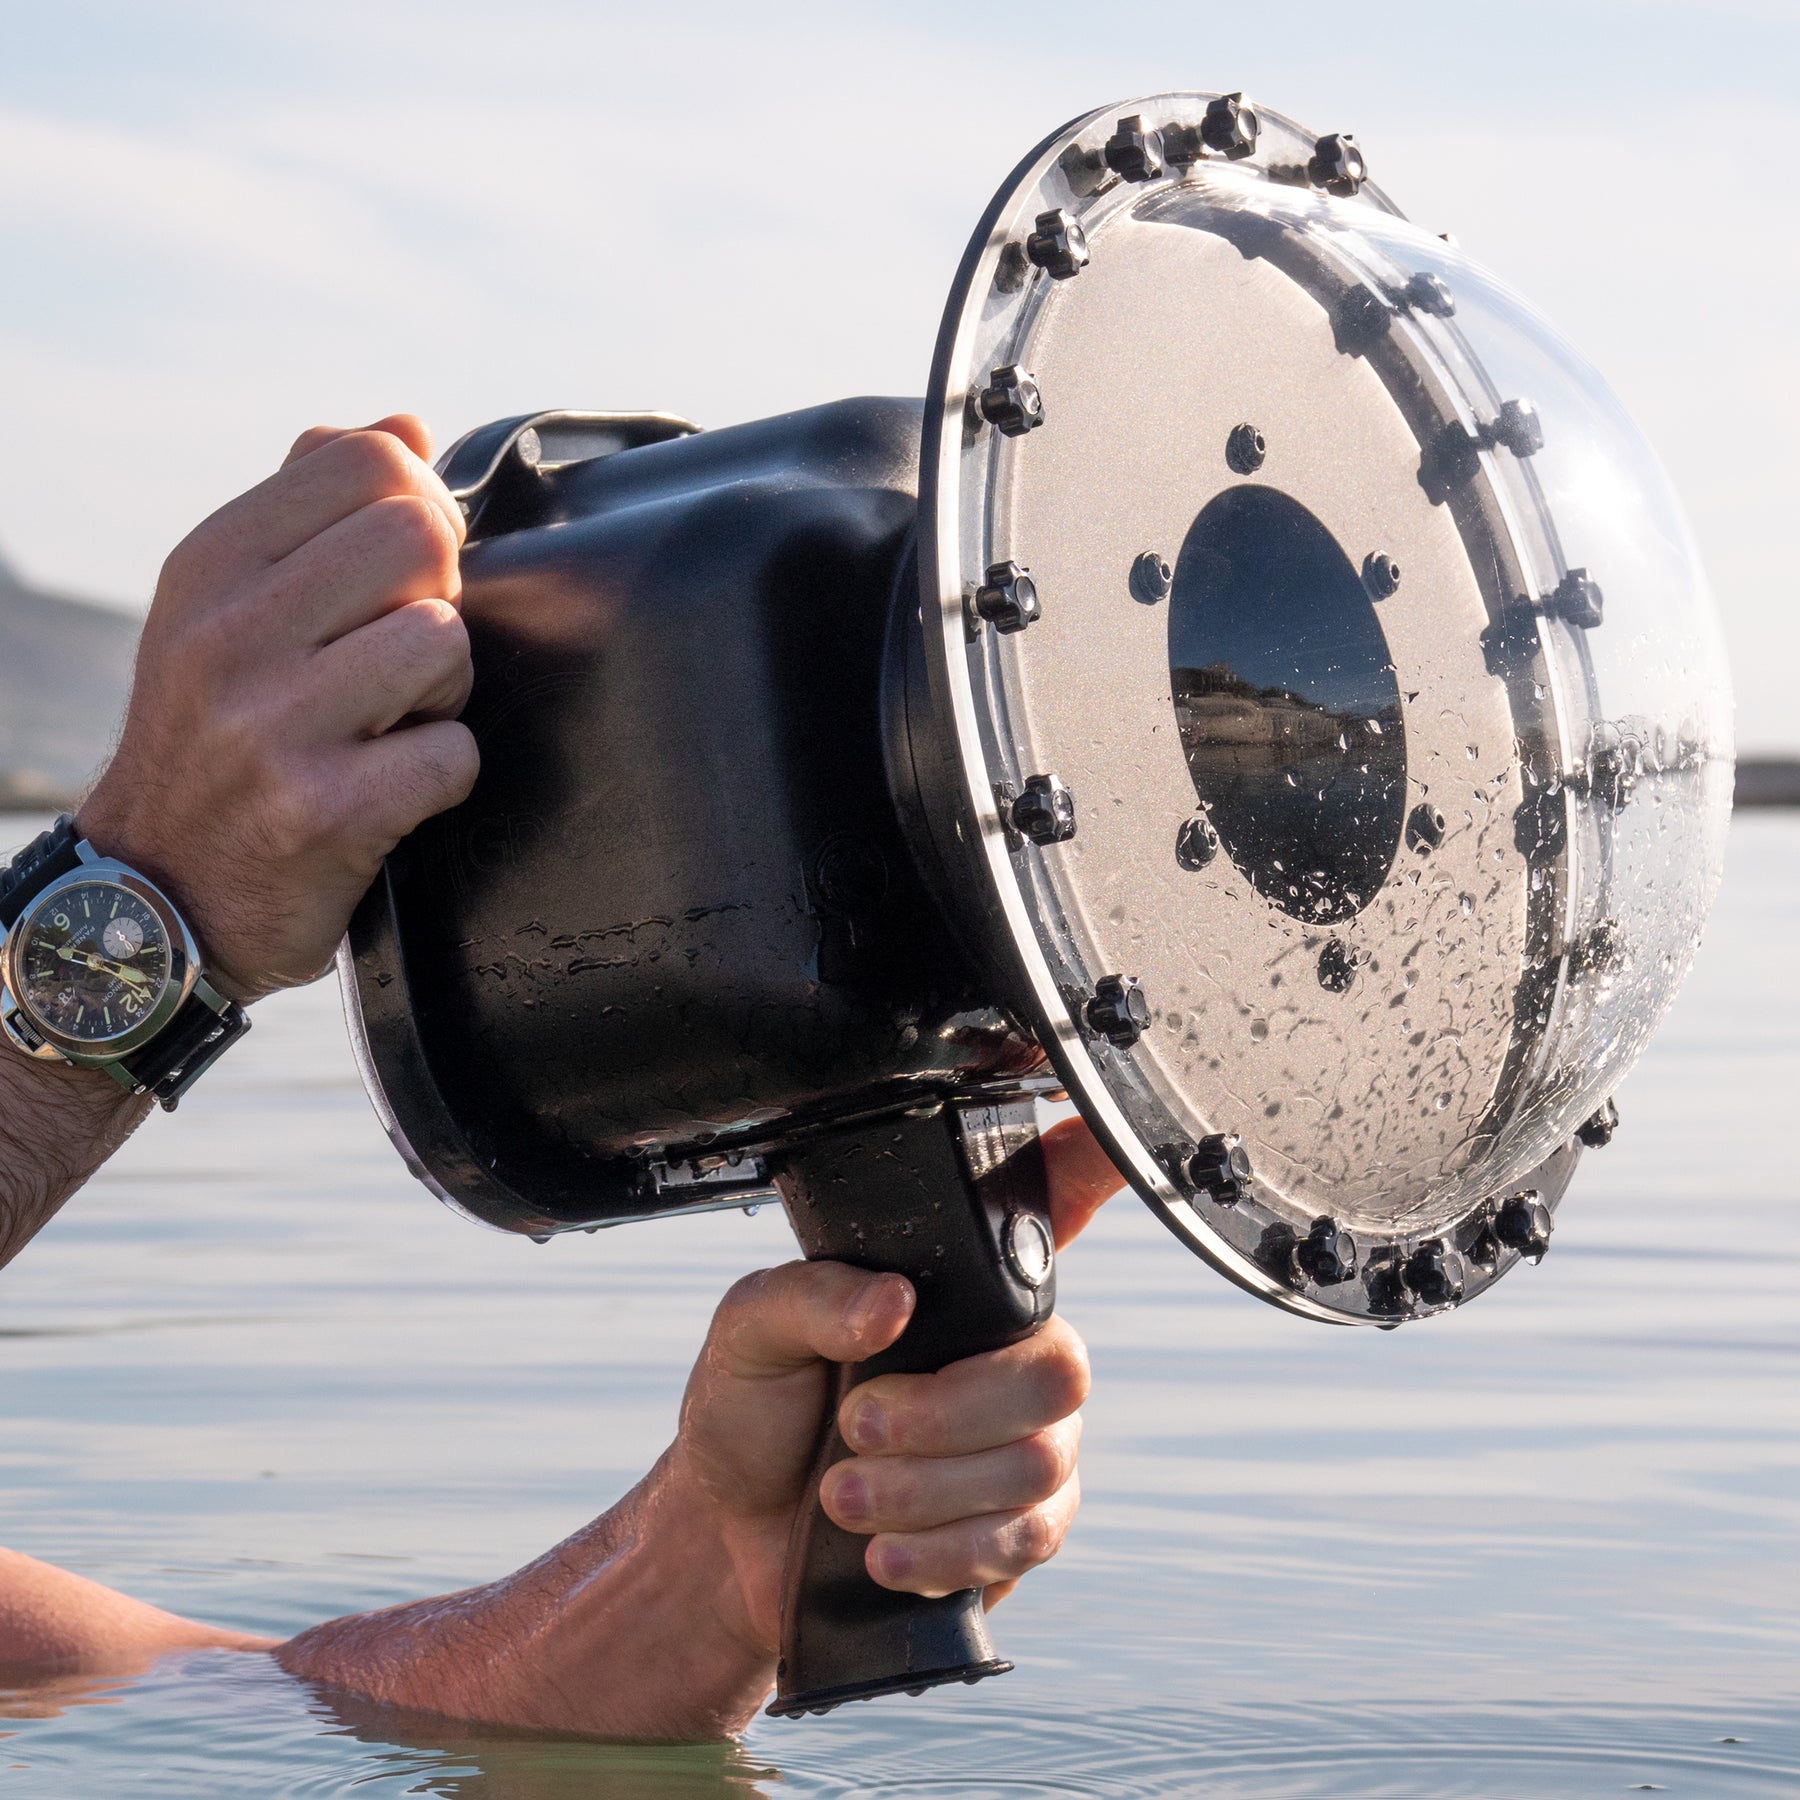 How to choose the right underwater photography equipment 2023